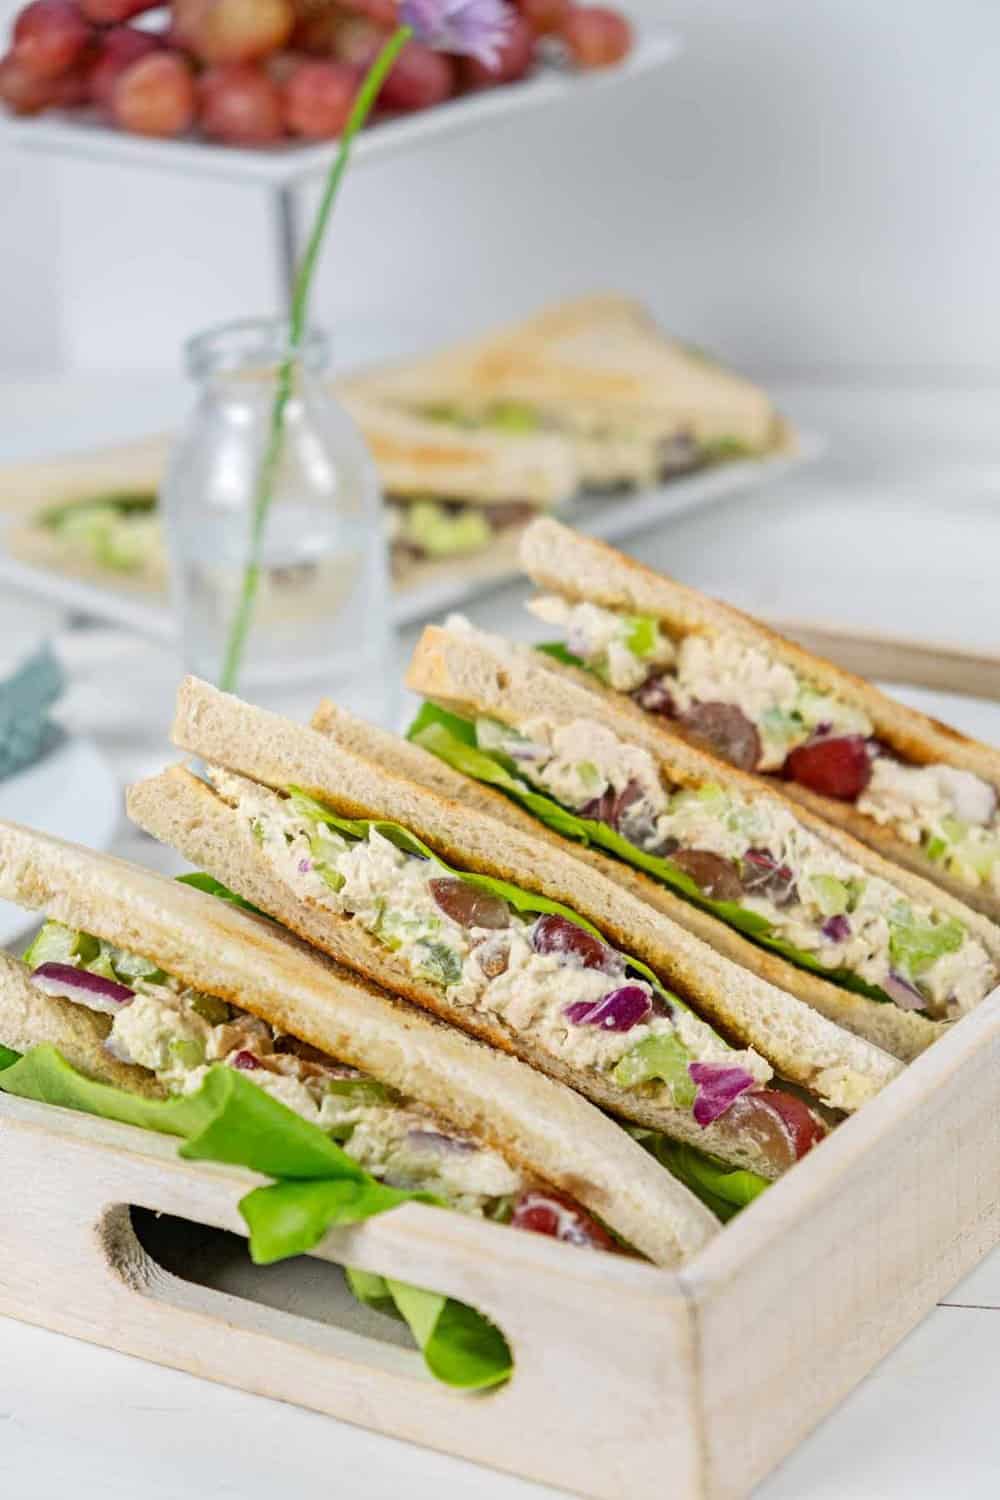 Serving container of chicken salad sandwiches with grapes.